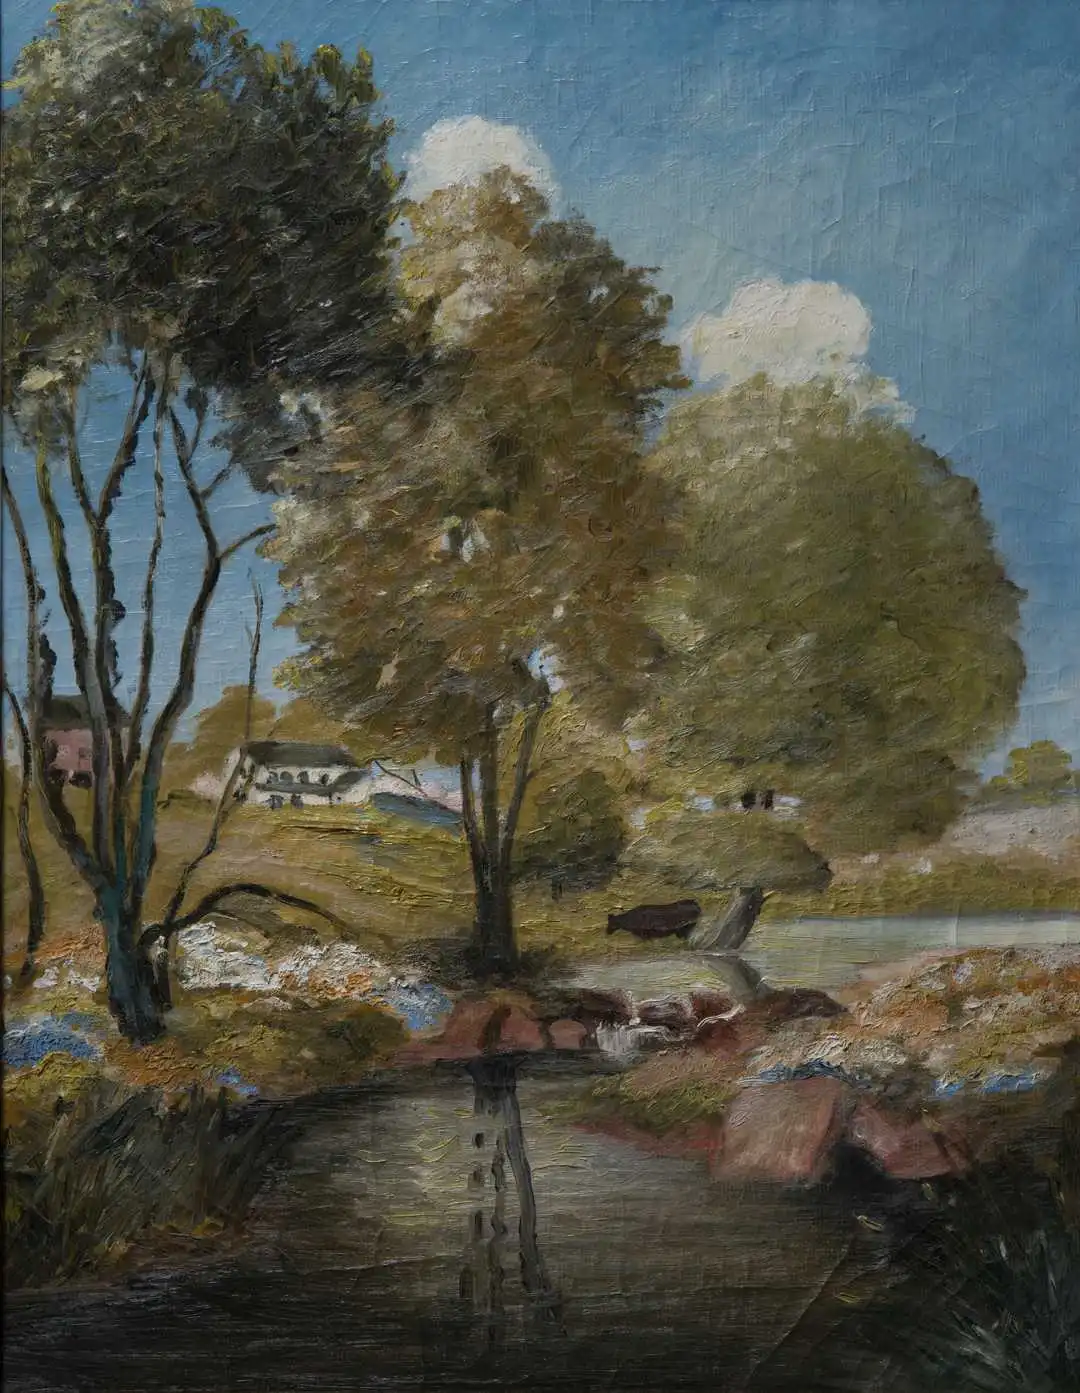 A lanscape oil painting of birchwood trees along a river with houses in the background.